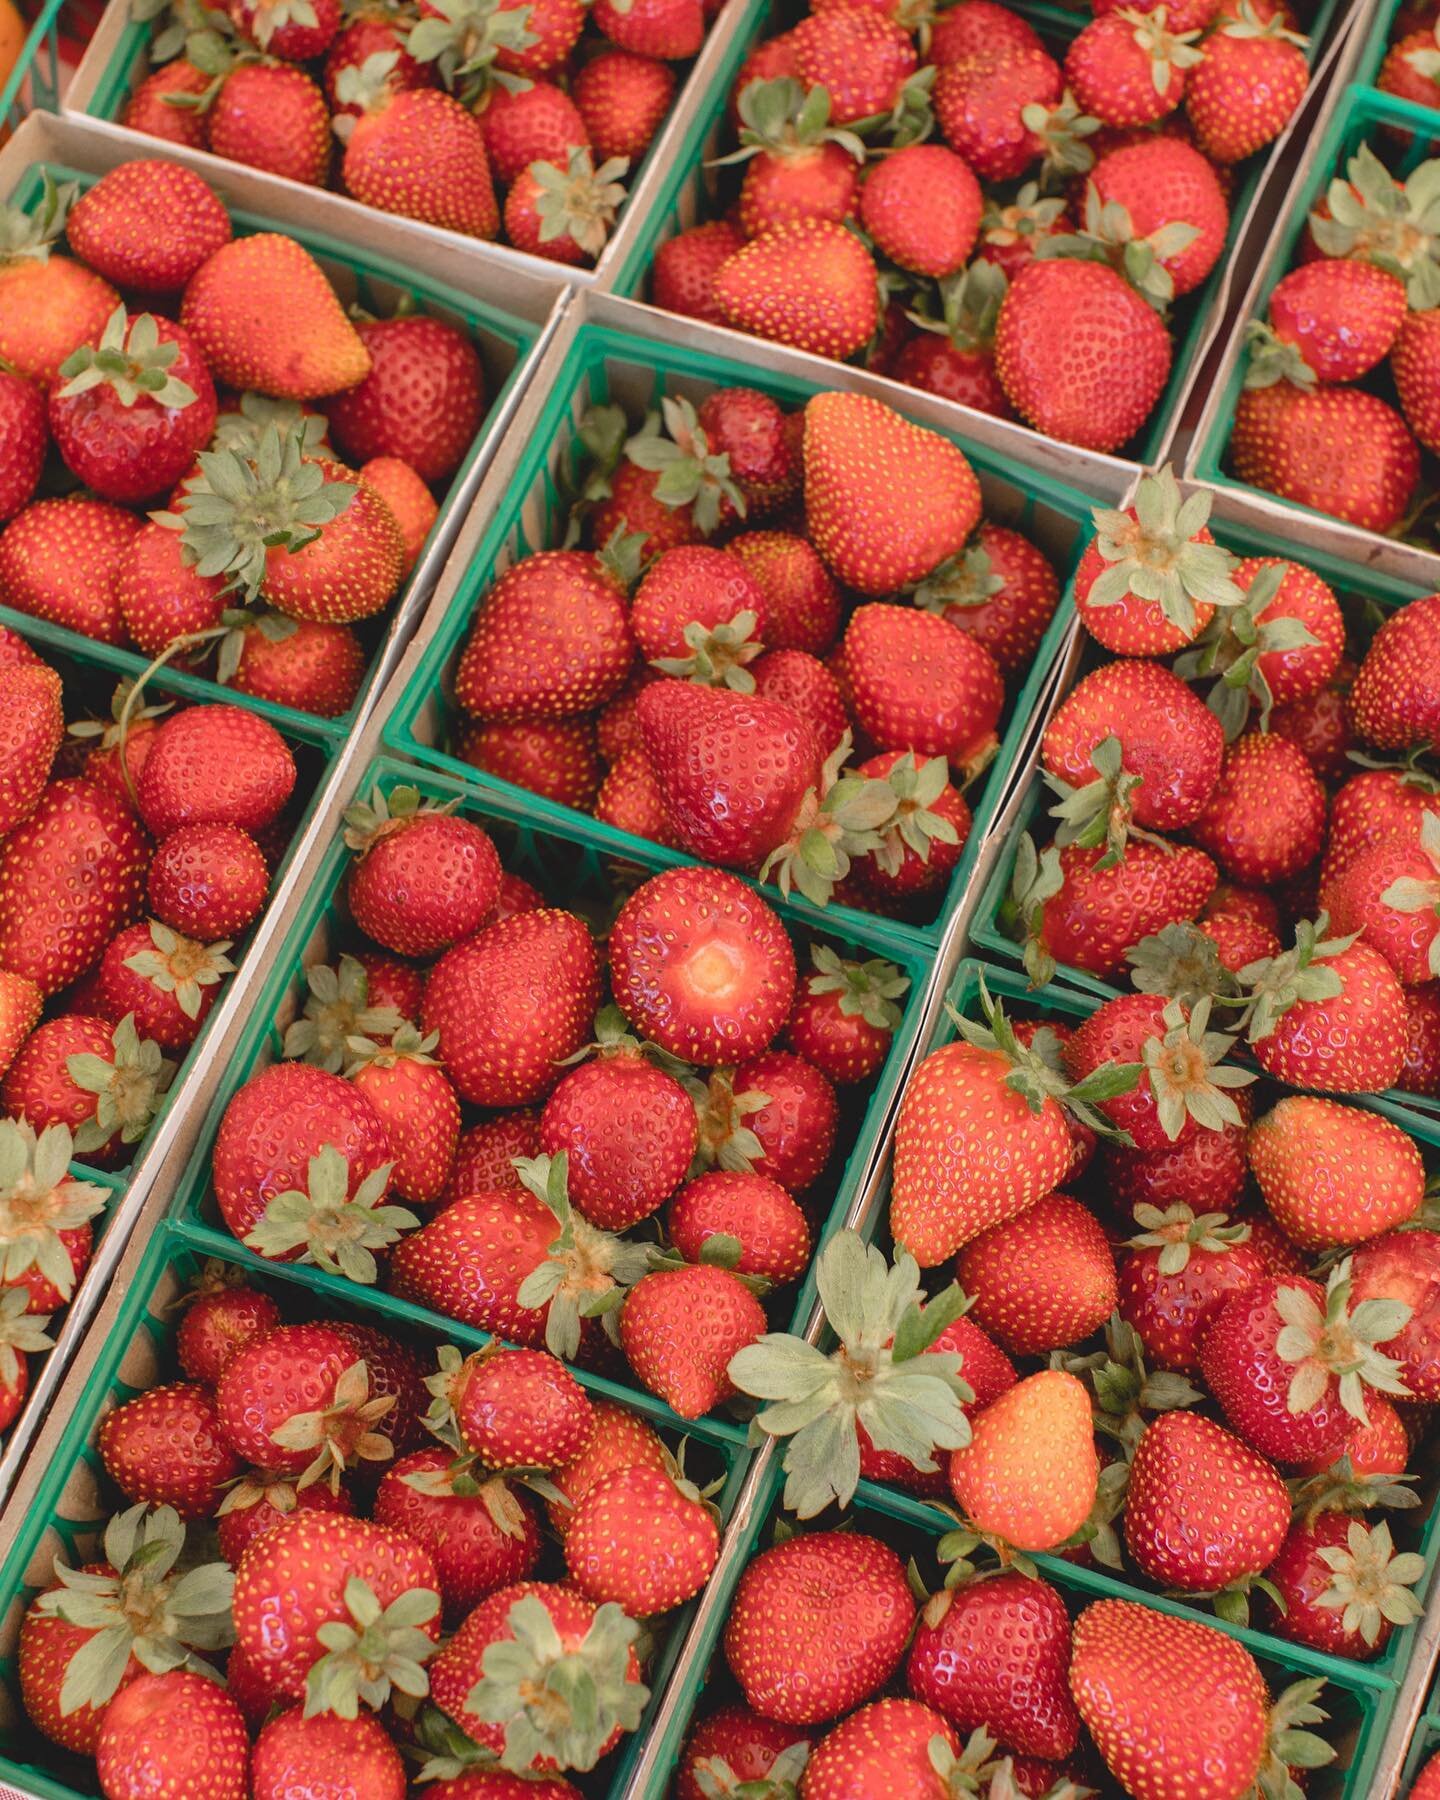 Peak strawberry season is approaching and getting prepared with the right items to store your berries can make all the difference. Washing strawberries can be tricky as strawberries tend to soak up as much water as they can get into contact with. 
🍓